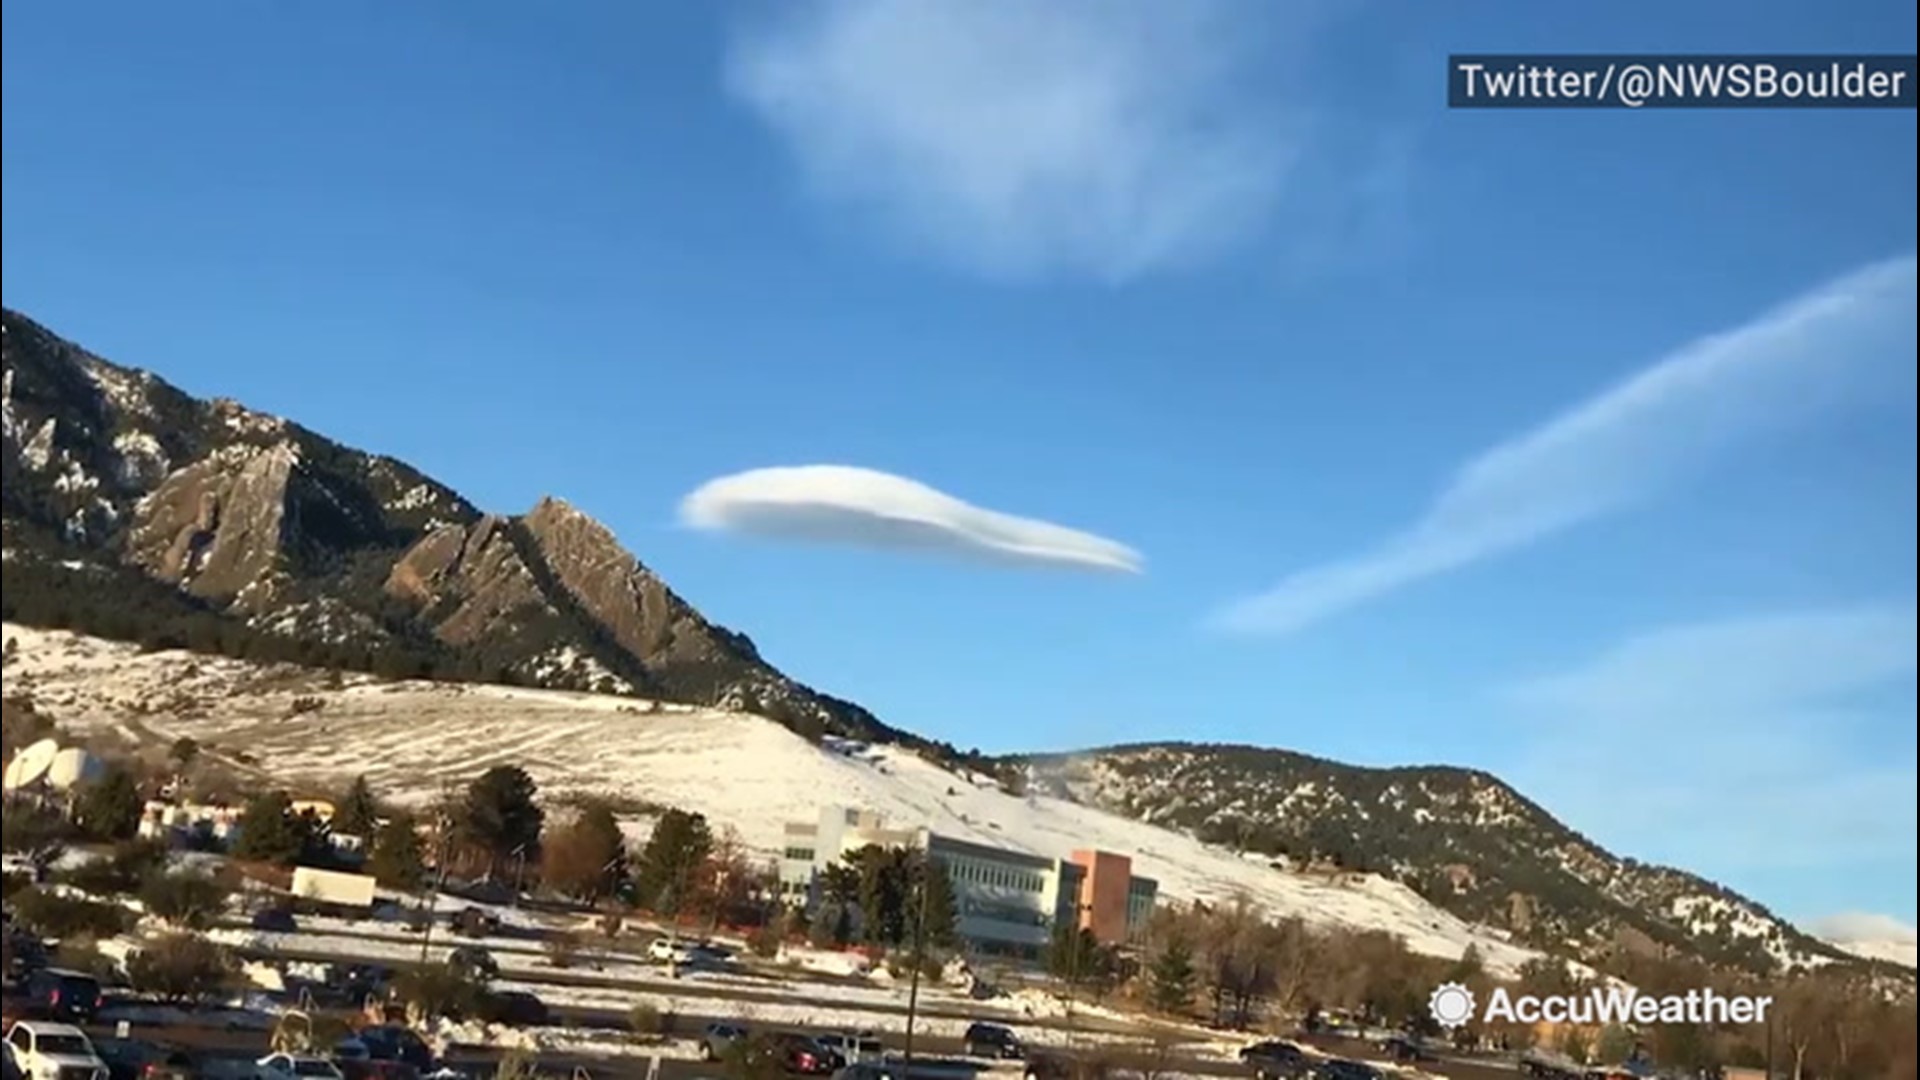 This timelapse shows a lenticular cloud, caused by the nearby mountains, sitting over Boulder, Colorado, on Friday morning.